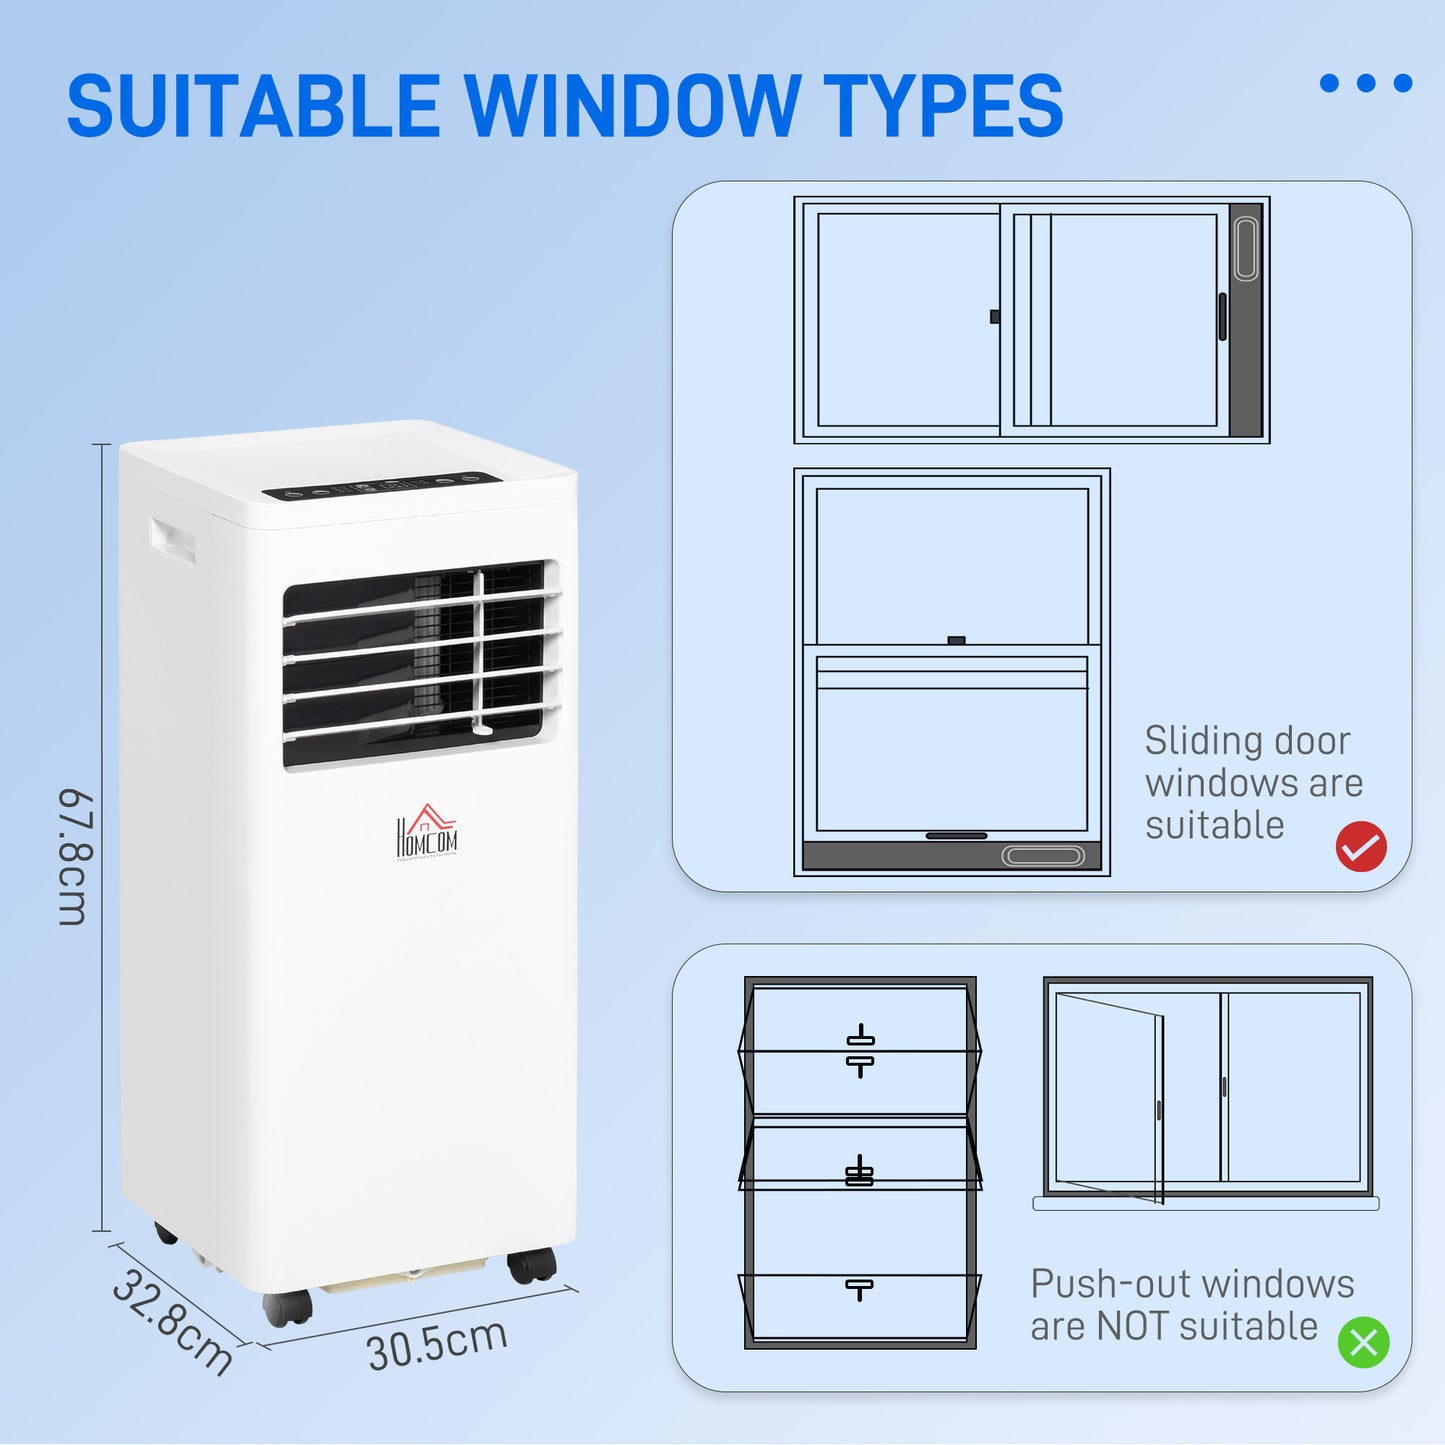 HOMCOM Mobile Air Conditioner White W/ Remote Control Cooling Dehumidifying Ventilating - 780W